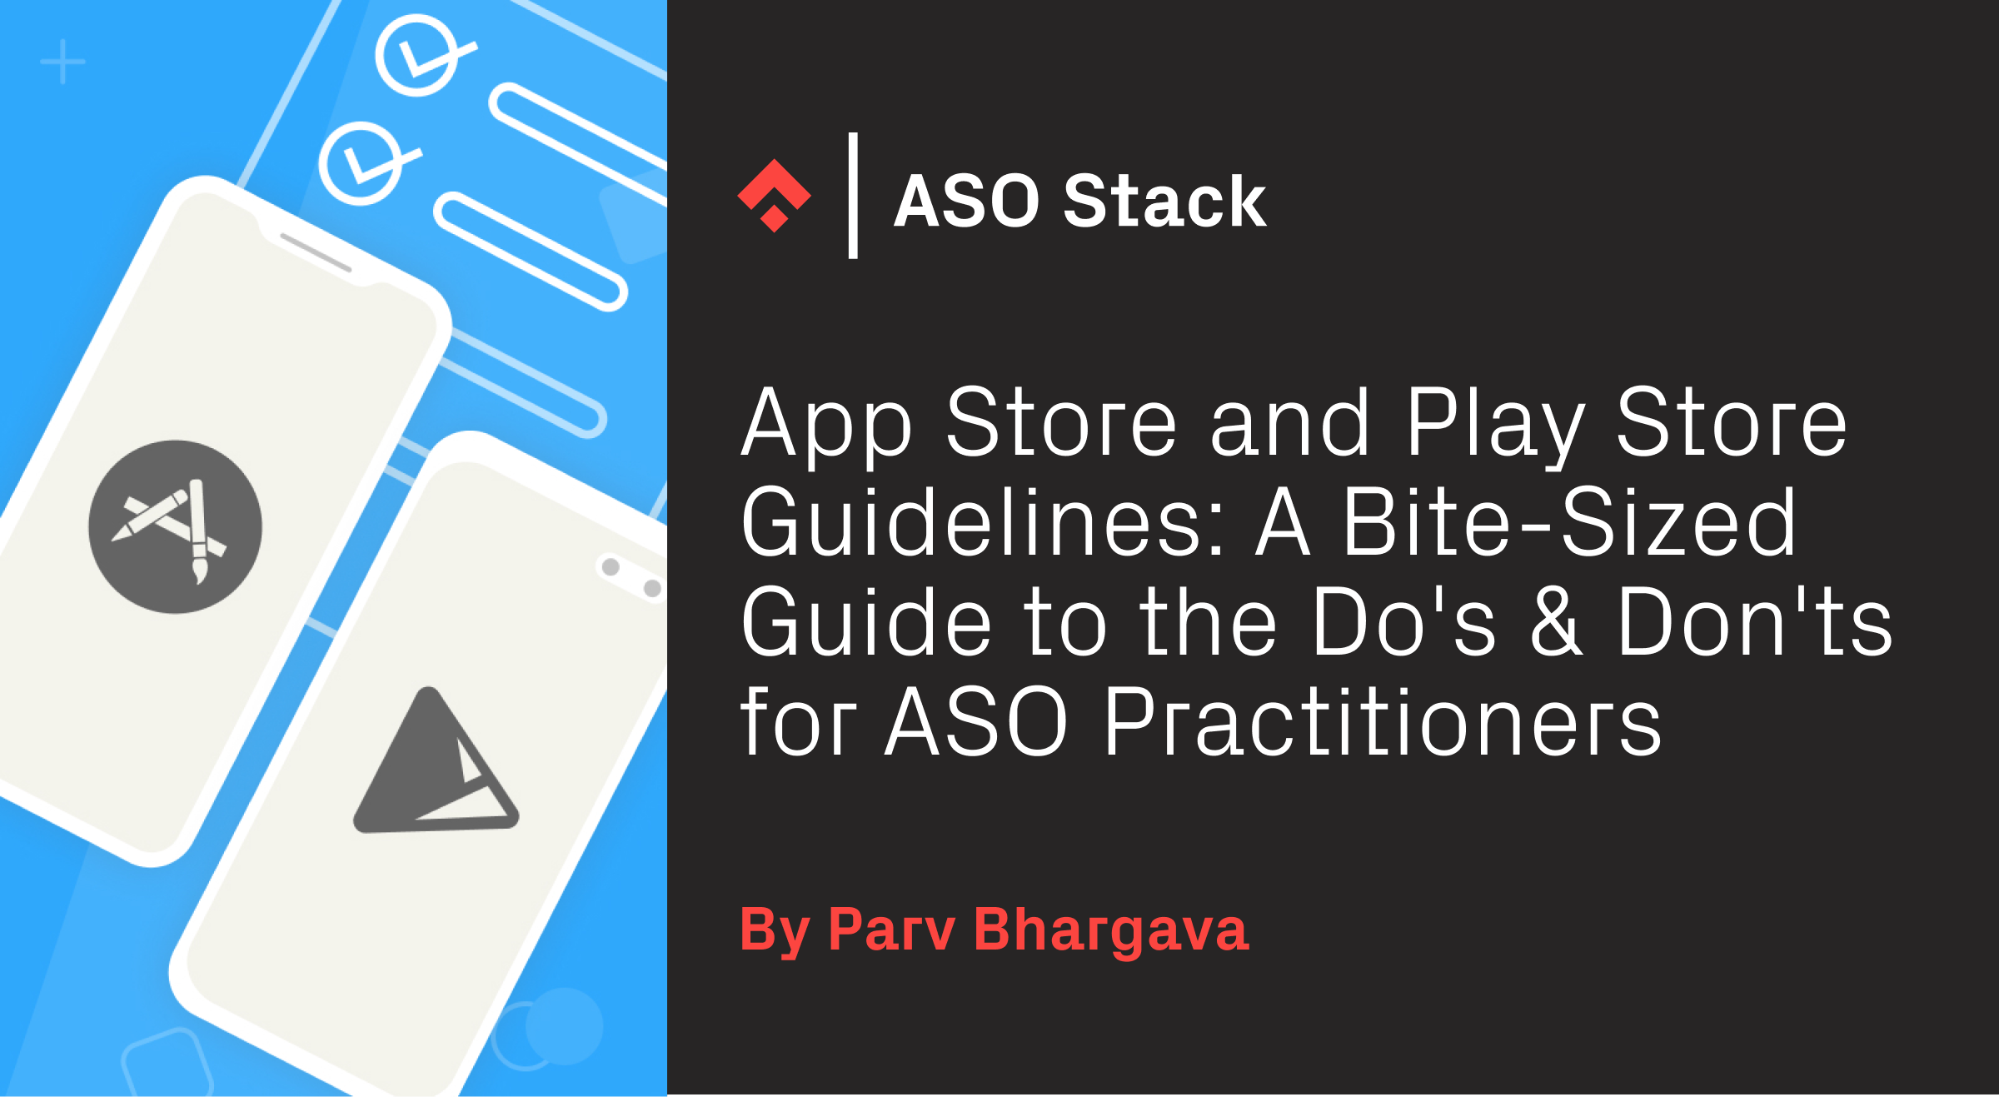 App Store and Play Store Guidelines: A Bite-Sized Guide to the Do's and Don'ts for ASO Practitioners